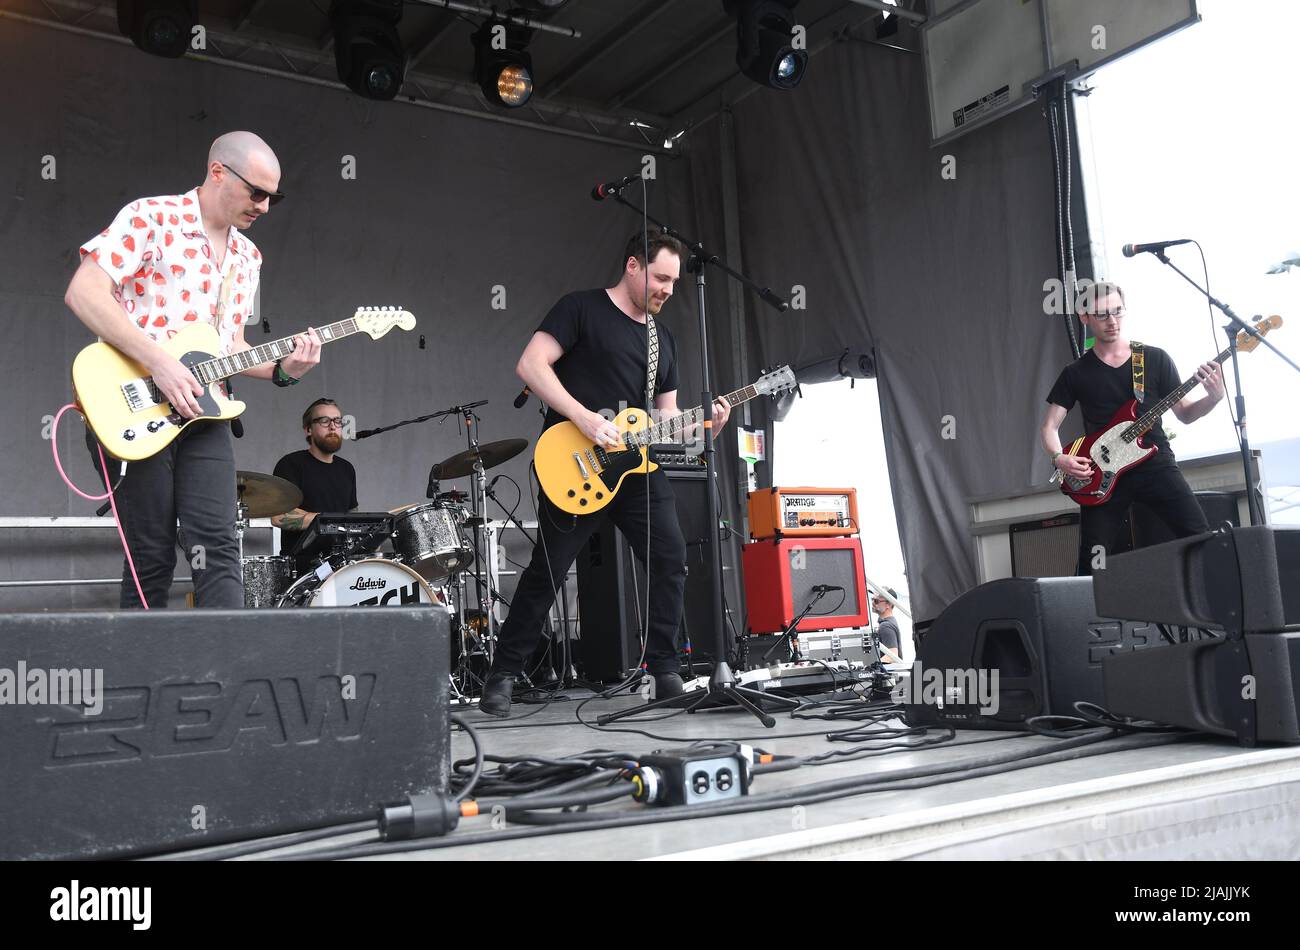 The Dutch Tulips, Matthew Freake, Justin Mantell, and brothers Matthew and John Holland, are shown performing on stage during a live concert appearance at the Boston Calling music festival held in Allston, Massachusetts on May 29, 2022. Stock Photo